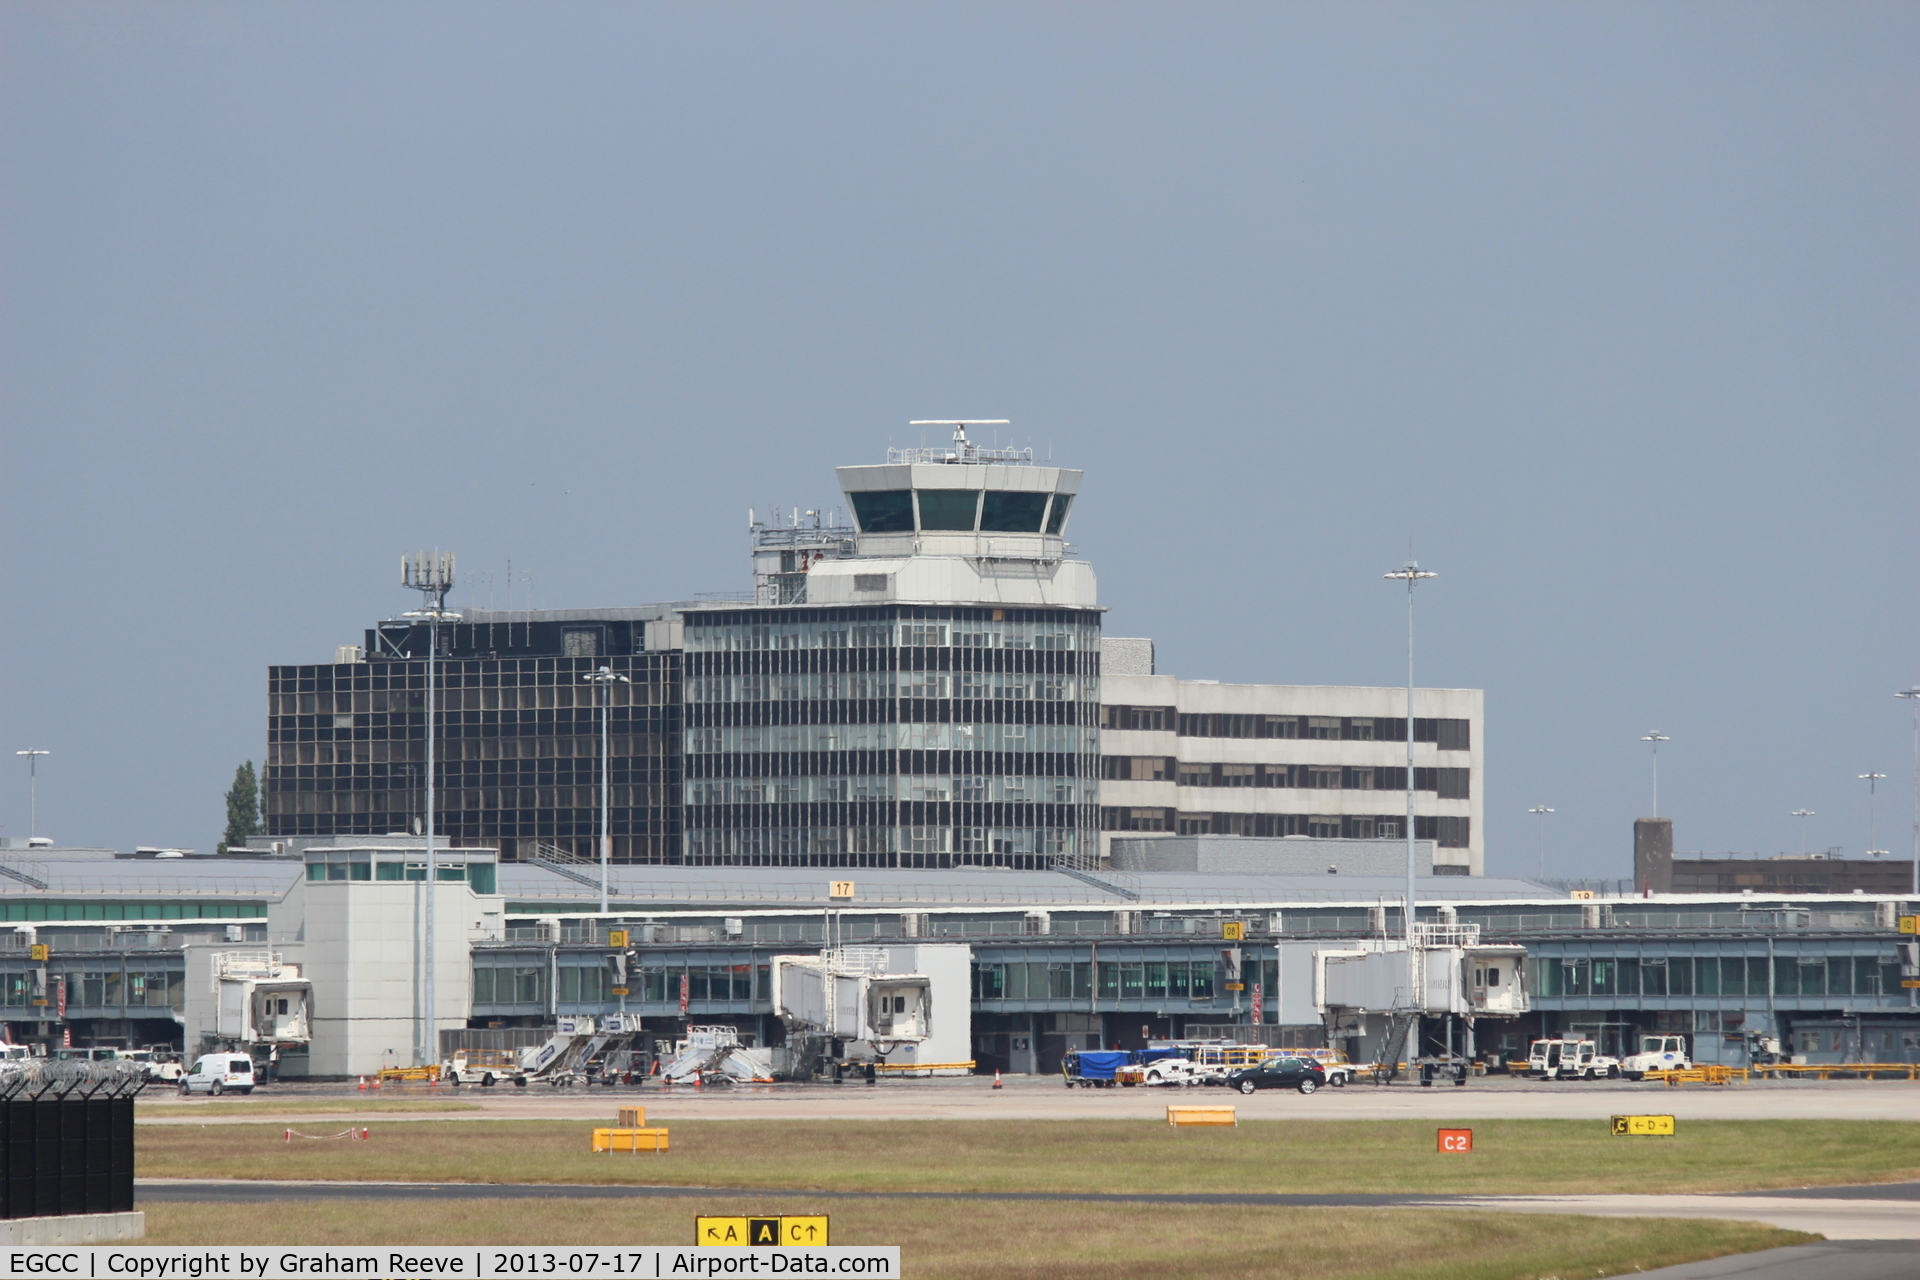 Manchester Airport, Manchester, England United Kingdom (EGCC) - General view from the visitors park.